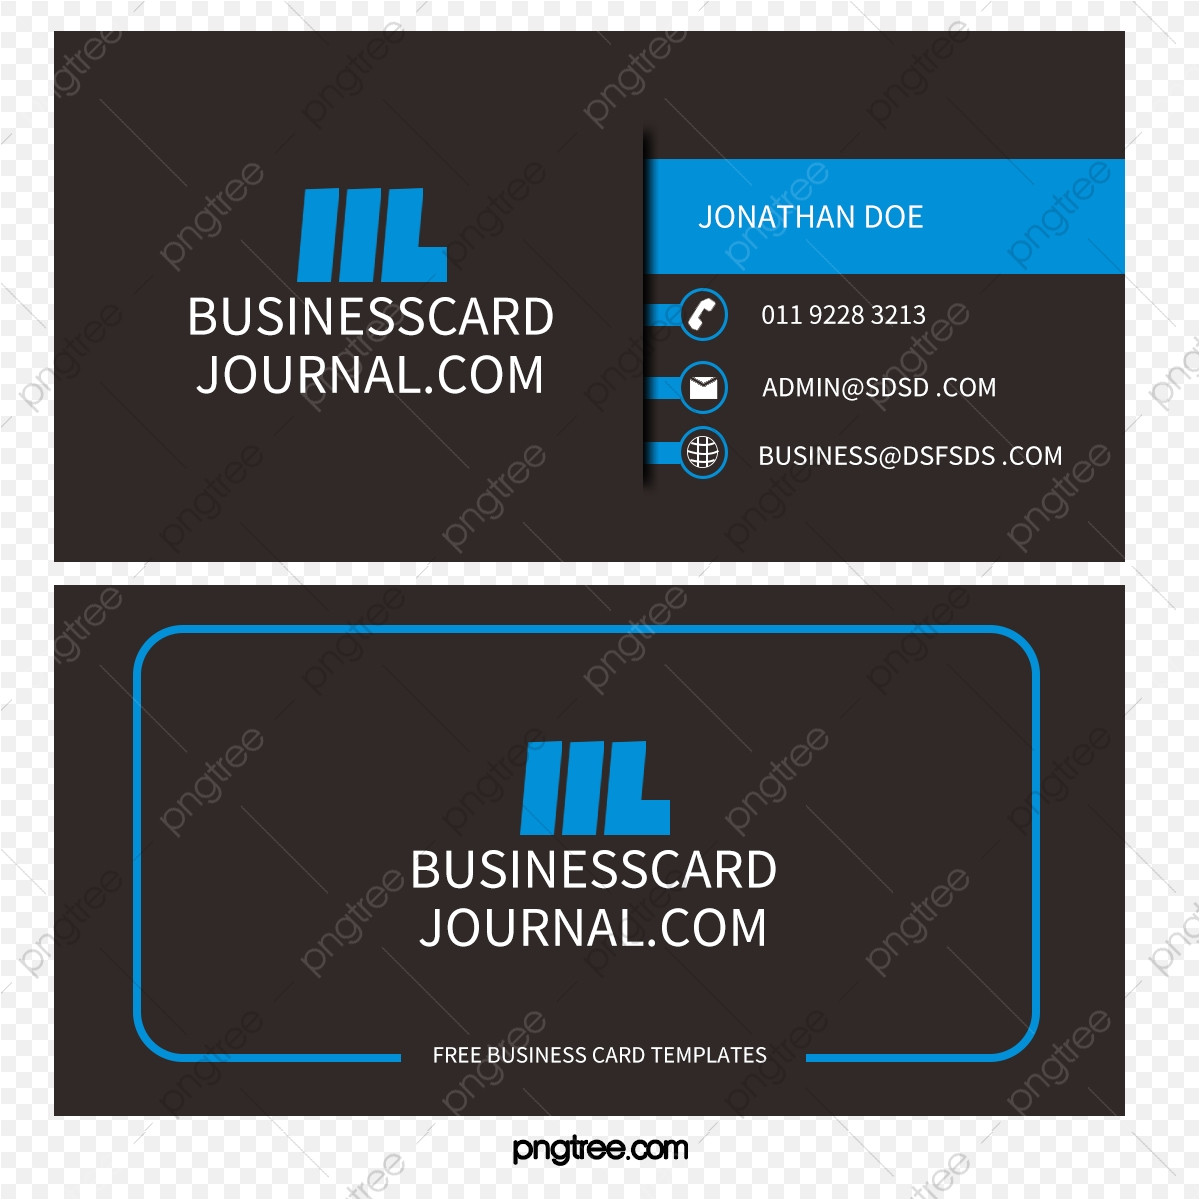 pngtree business card png image 5054108 jpg